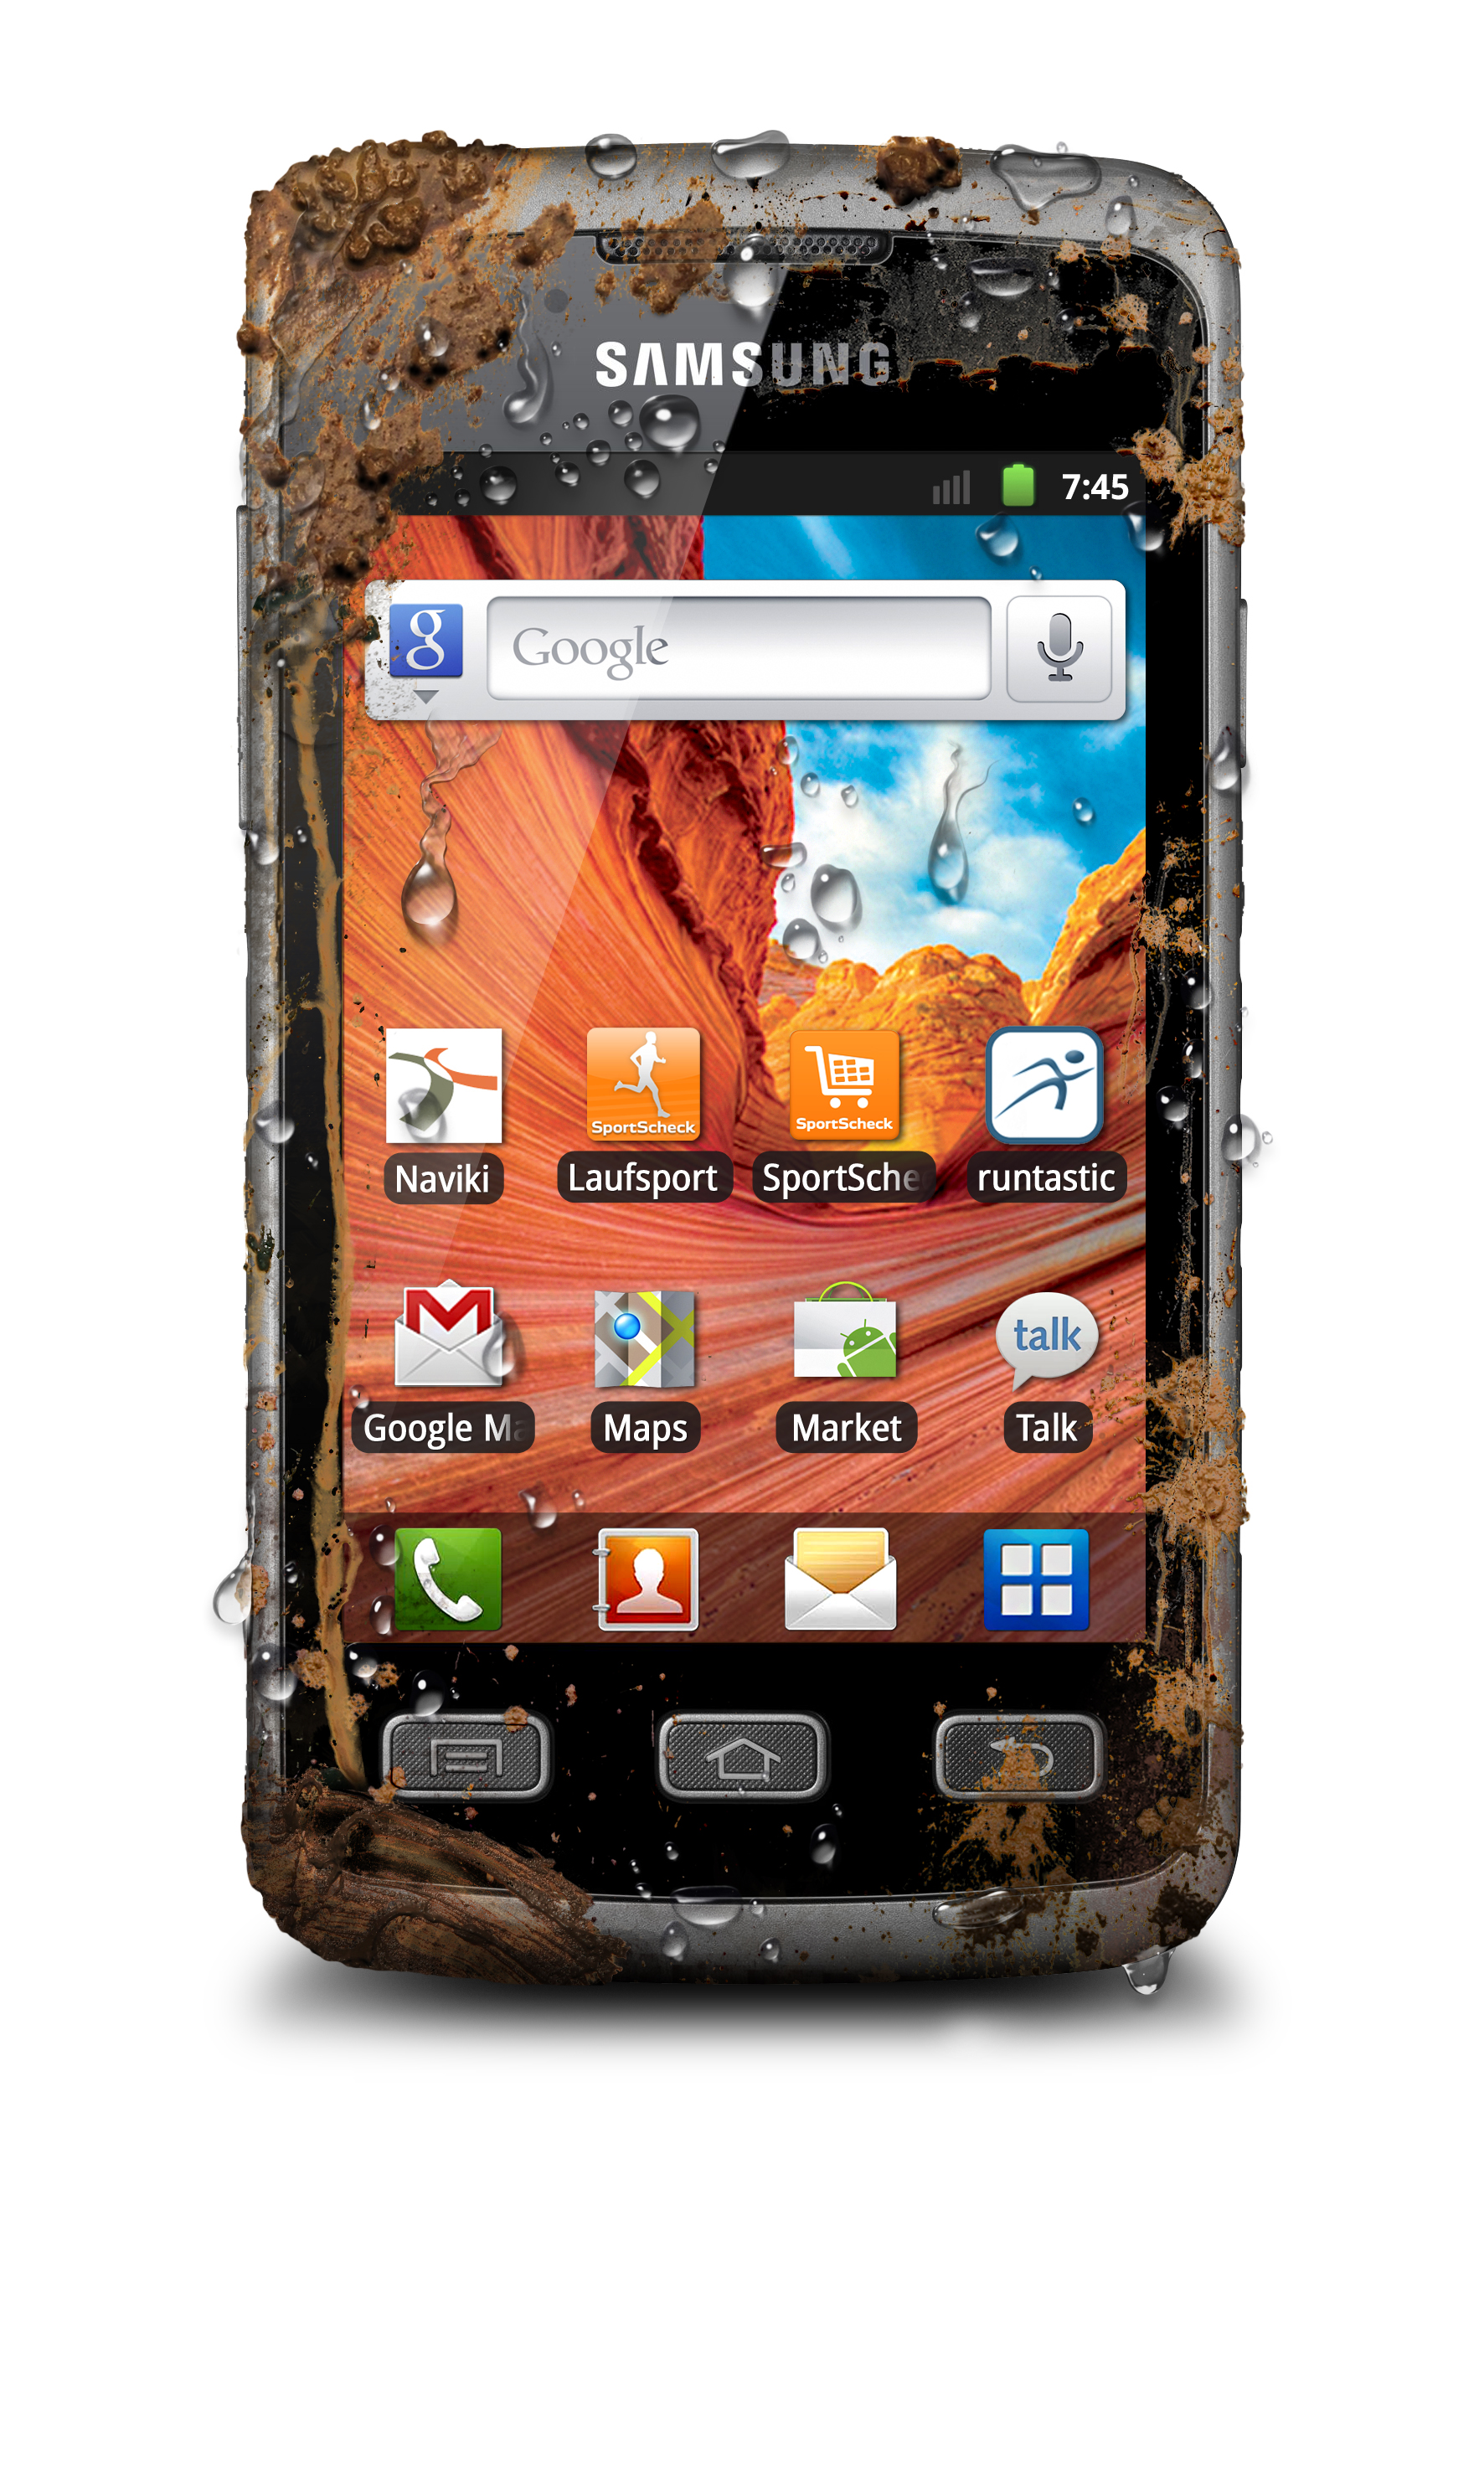 Samsung Galaxy Xcover Android Phone Phandroid